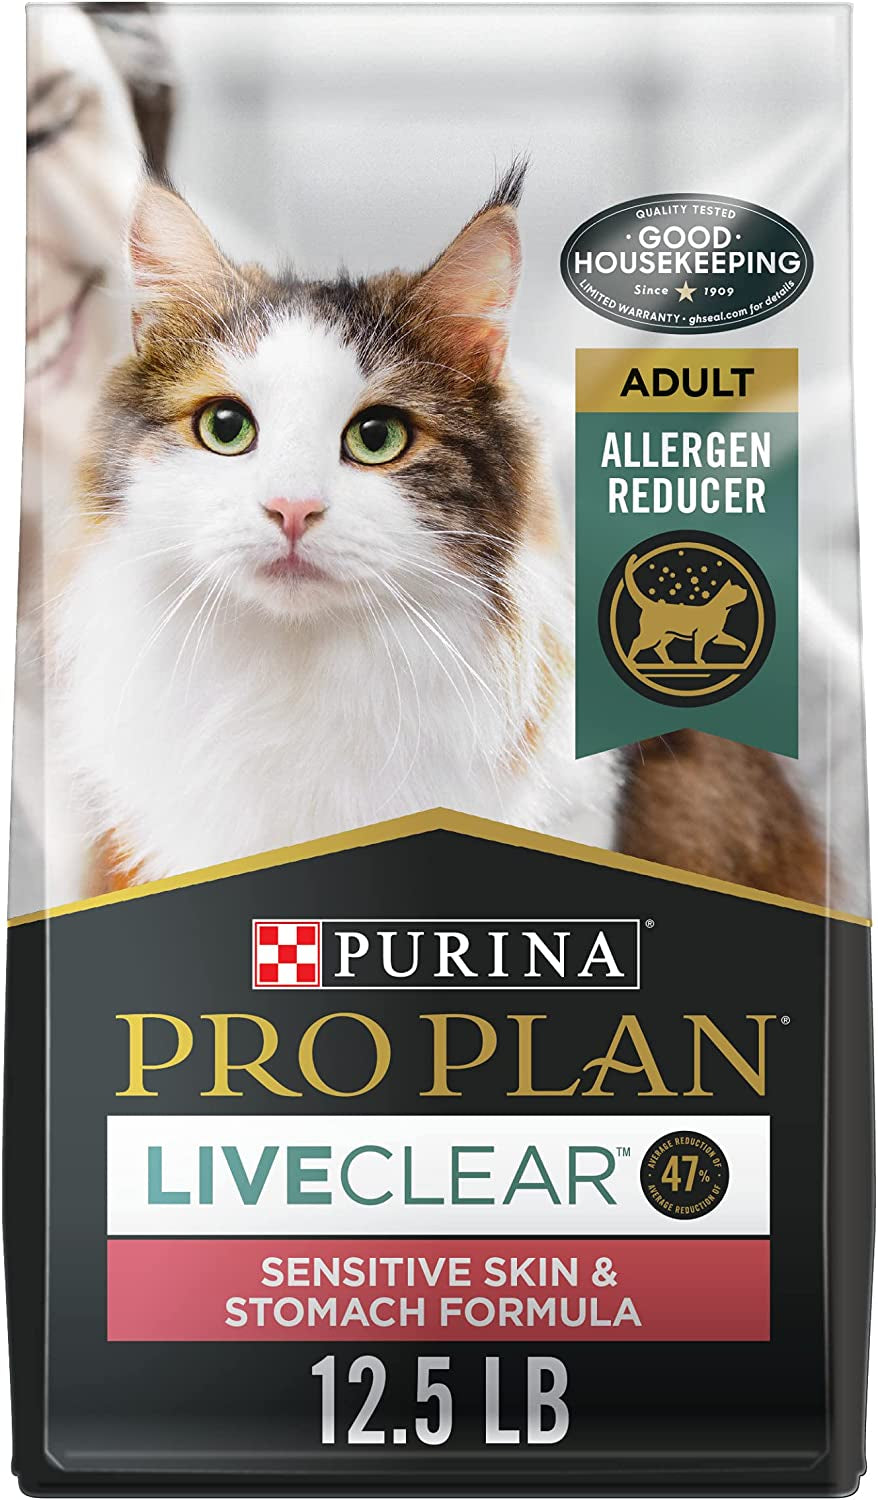 Allergen Reducing, High Protein Cat Food, LIVECLEAR Turkey and Oatmeal Formula - 12.5 Lb. Bag